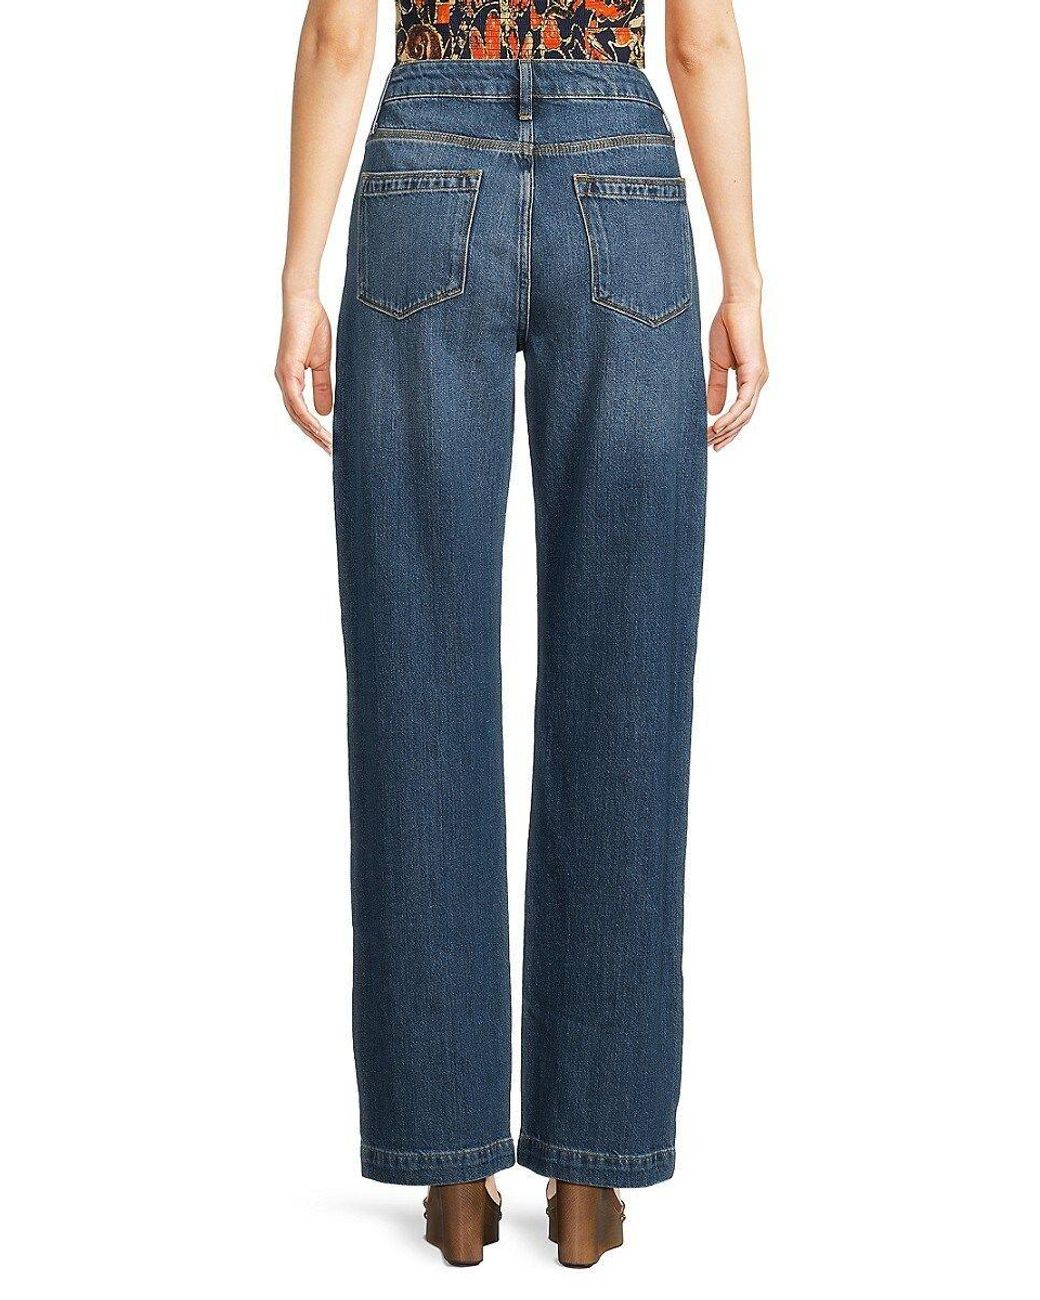 Reiss Adele Whiskered Jeans in Blue | Lyst